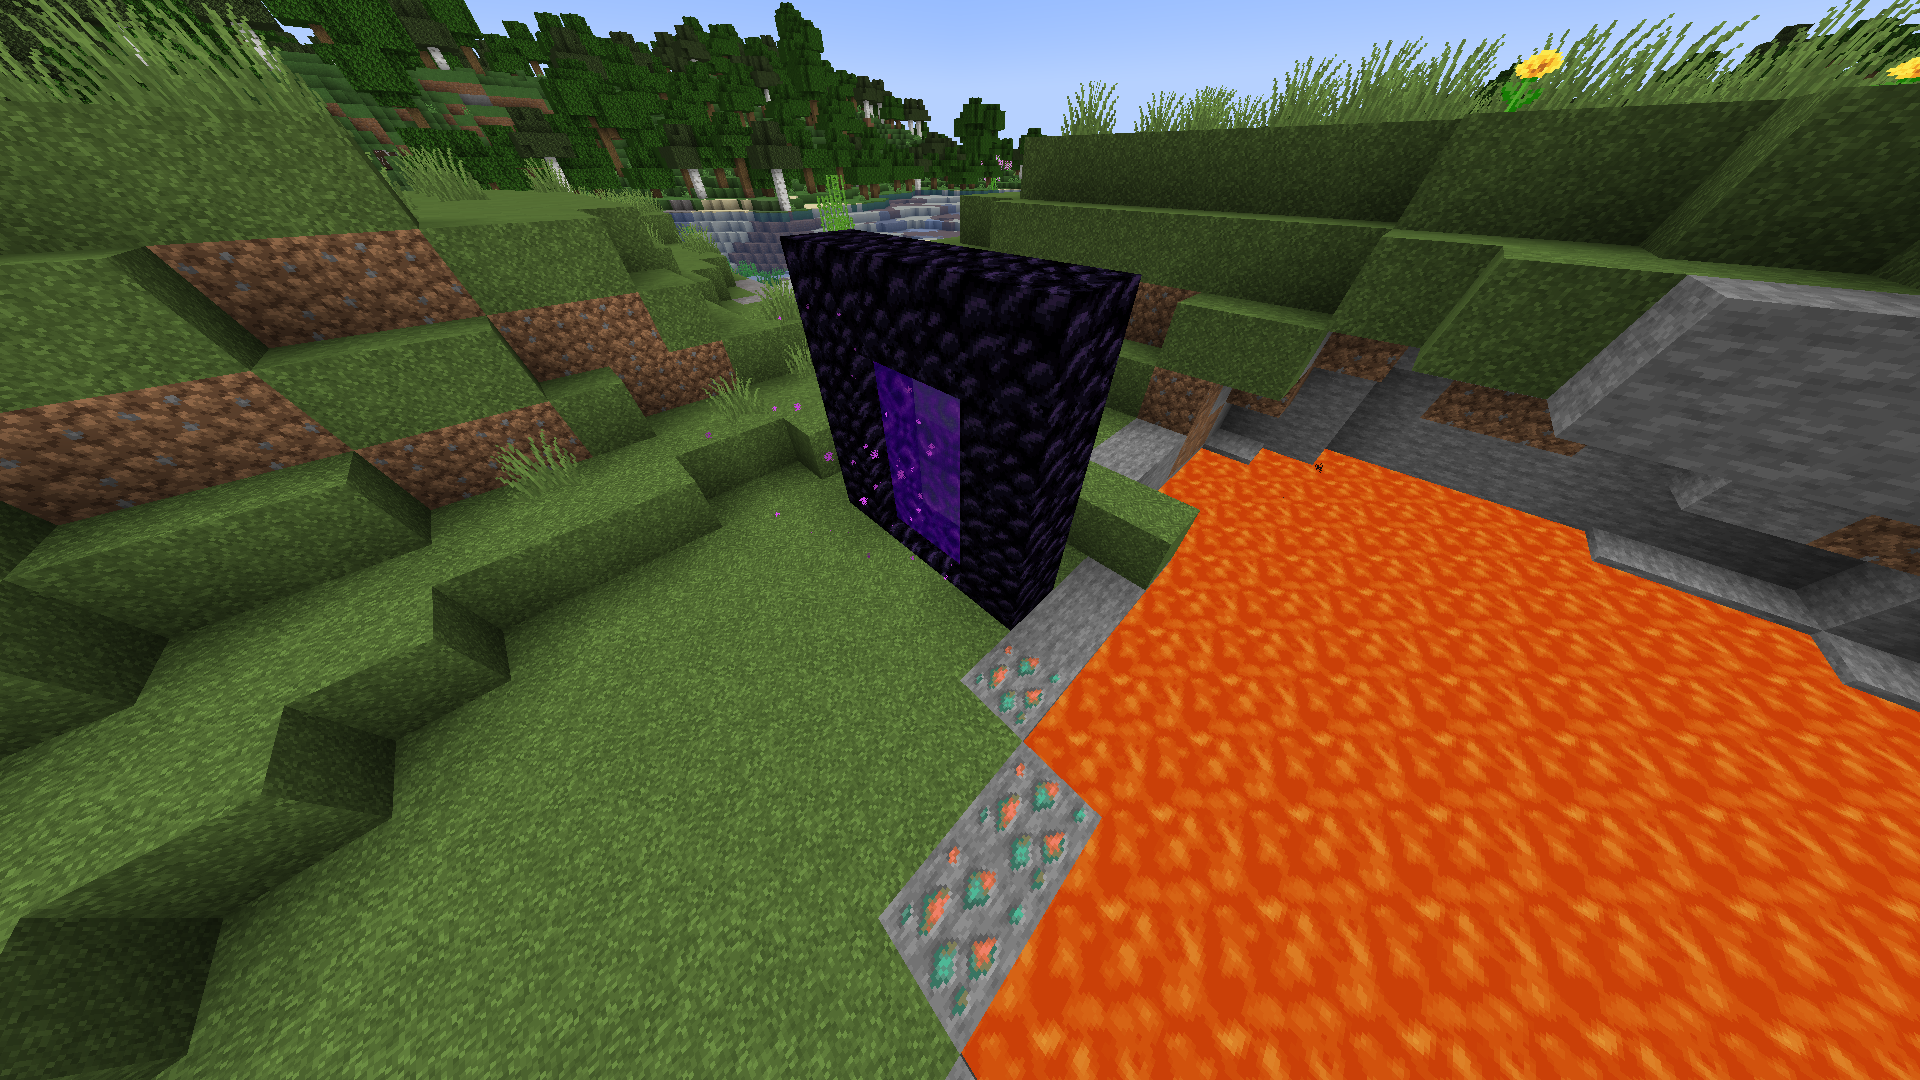 Nether Portal in the Overworld